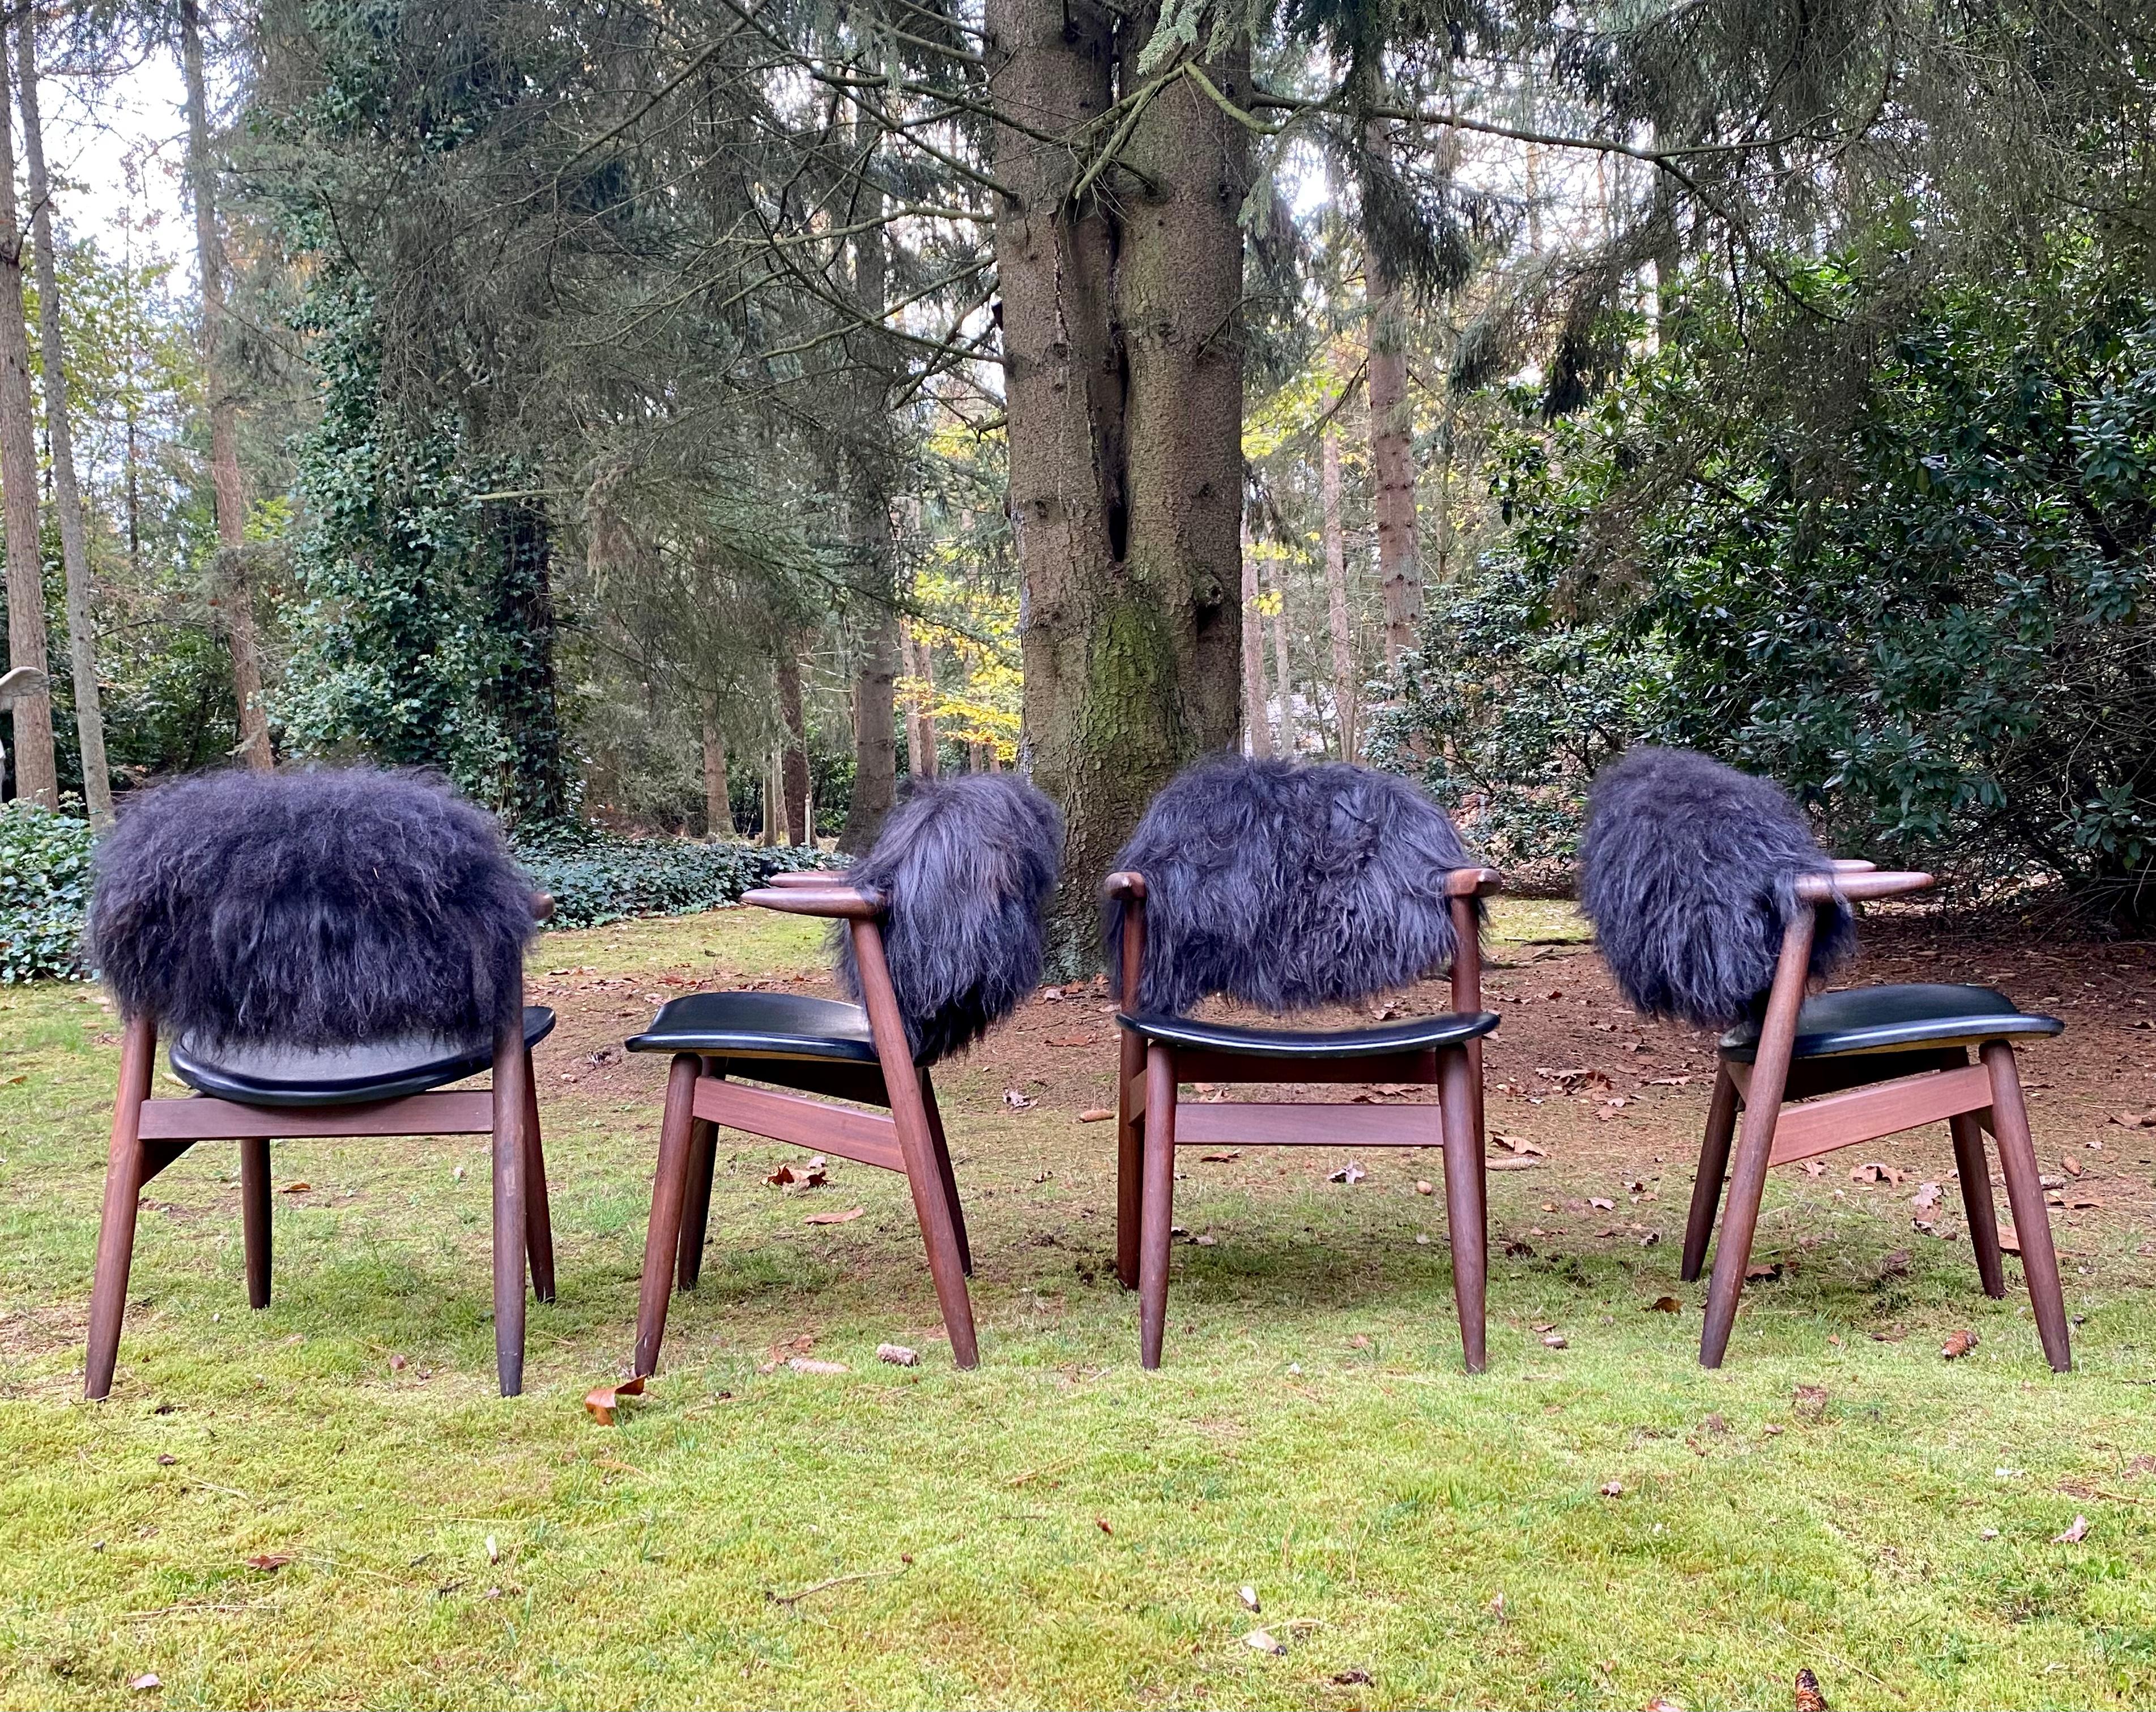 Outstanding set of four Cowhorn chairs, with reupholstered backrests. The backrests were re-upholstered and feature a natural Long haired Icelandic Sheep Skin upholstery which has been Ecologically treated. The color of the hair is completely